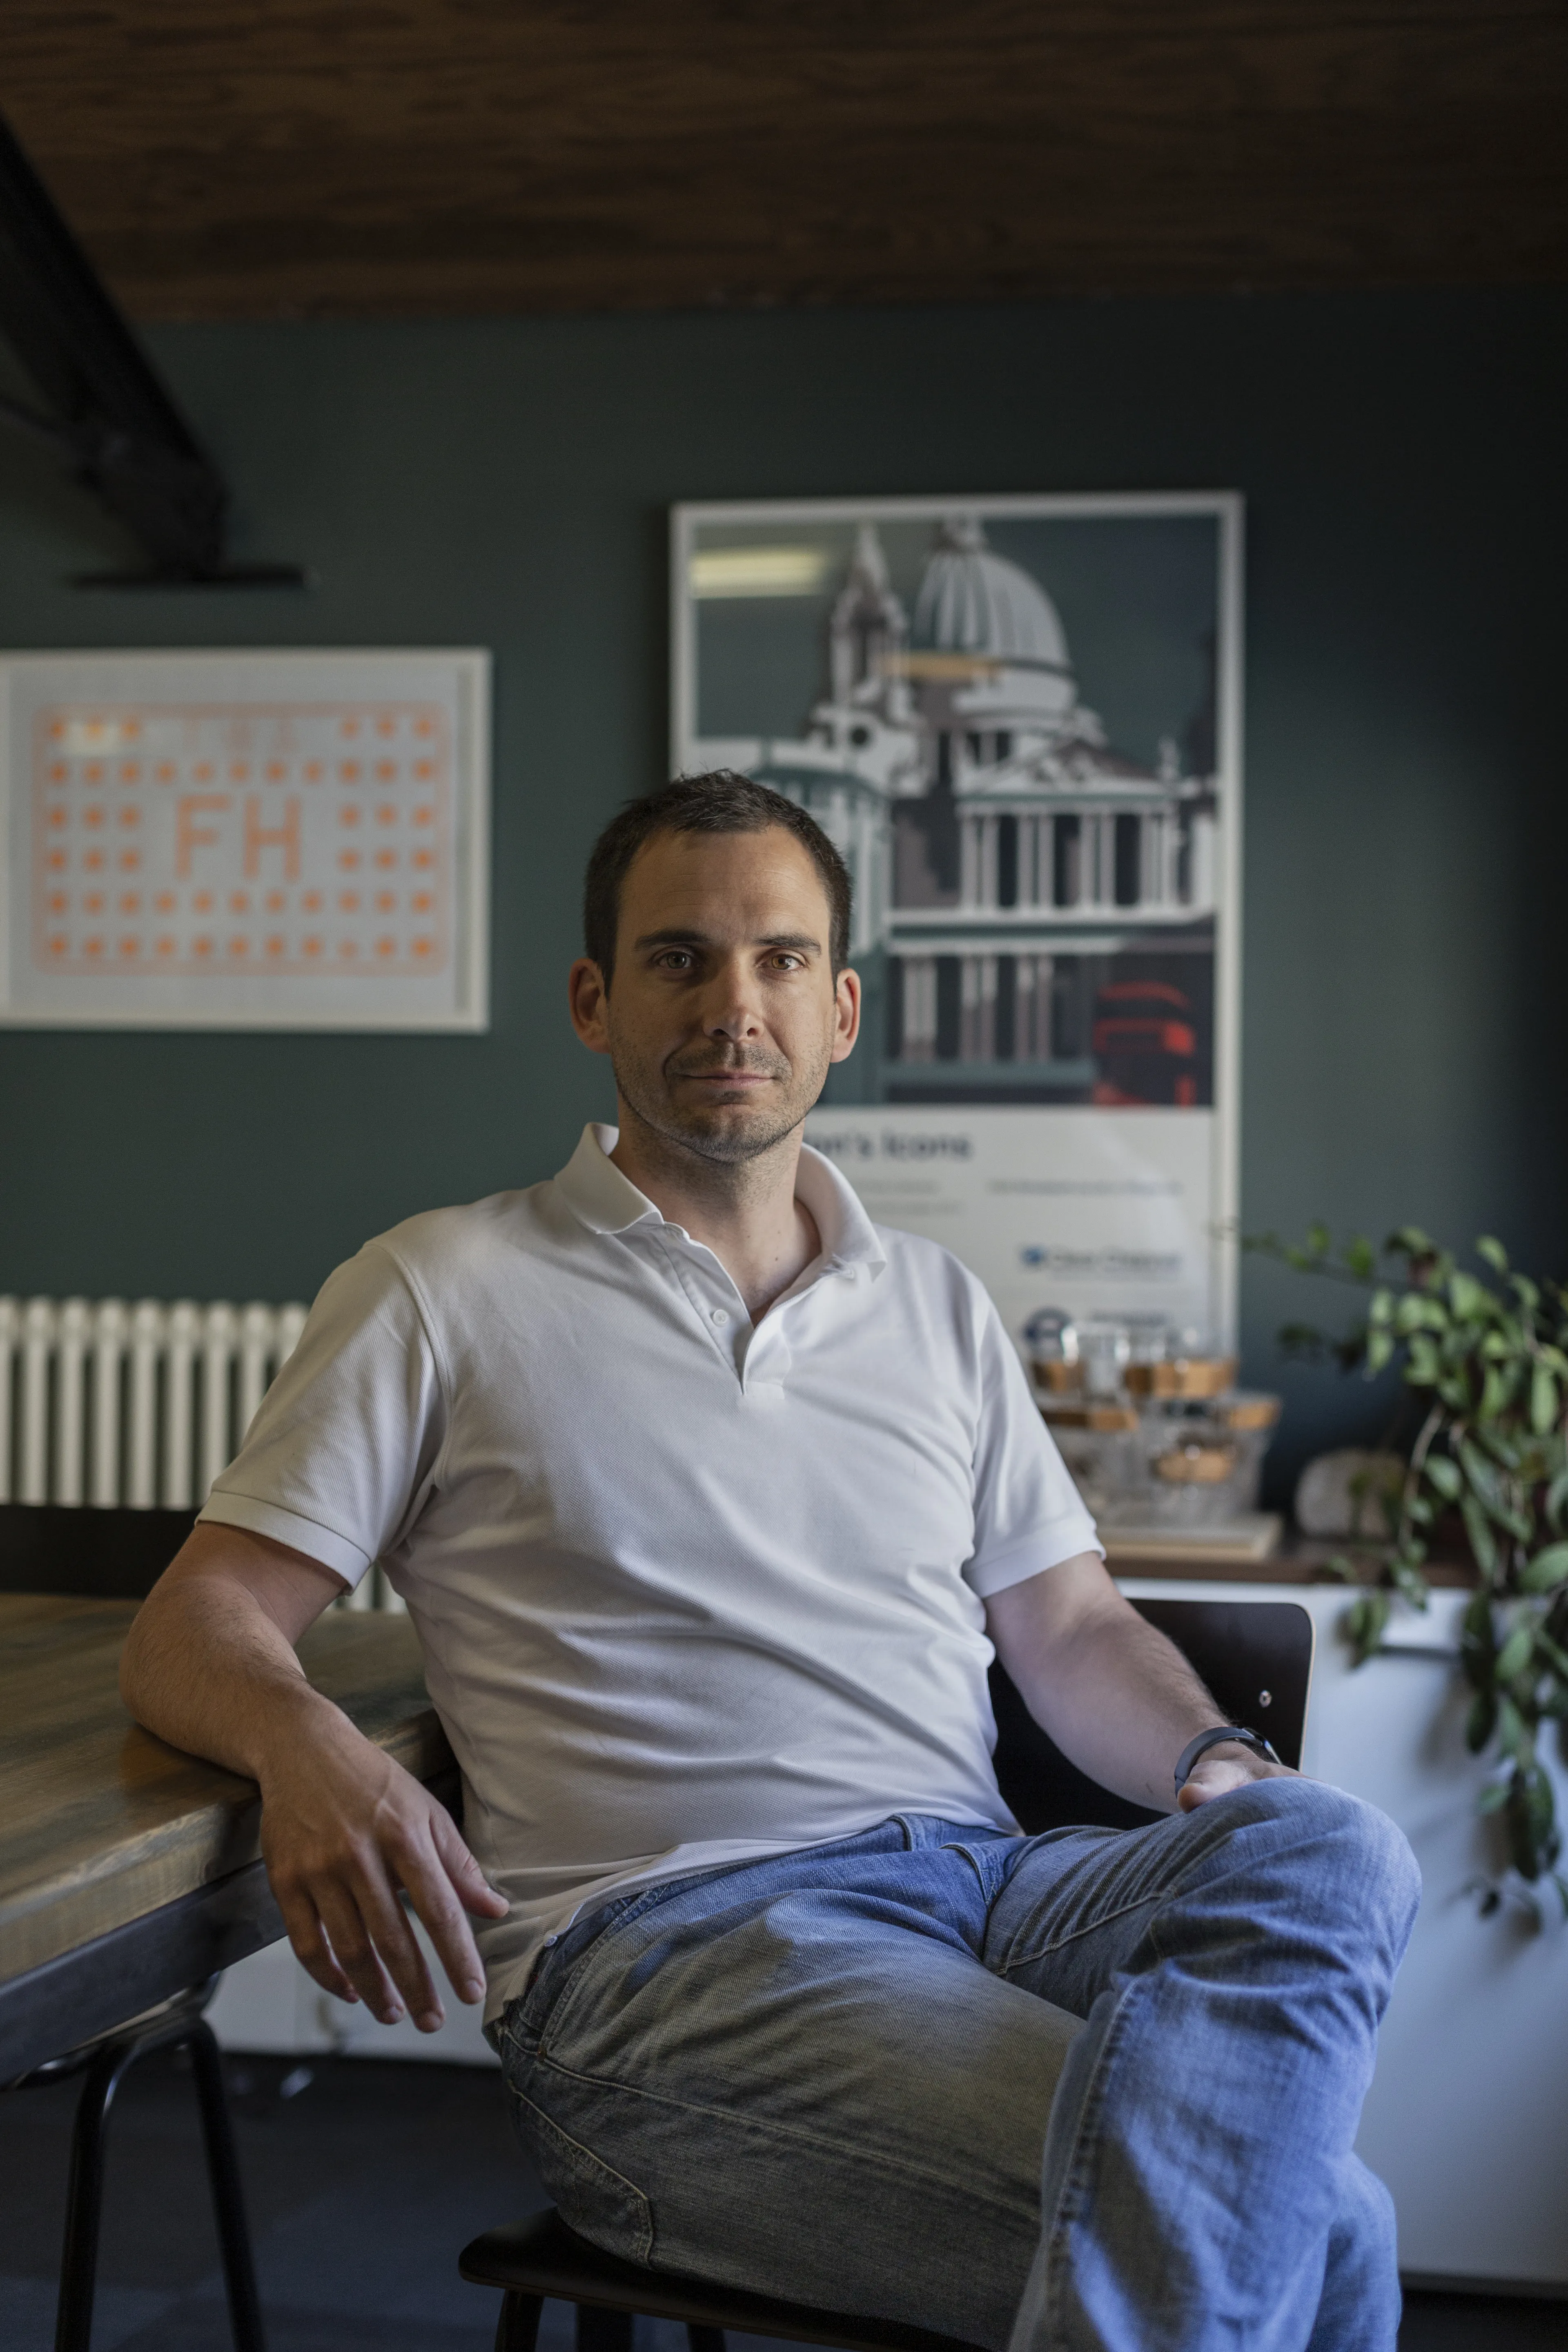 Alfonso Monedero seated in office